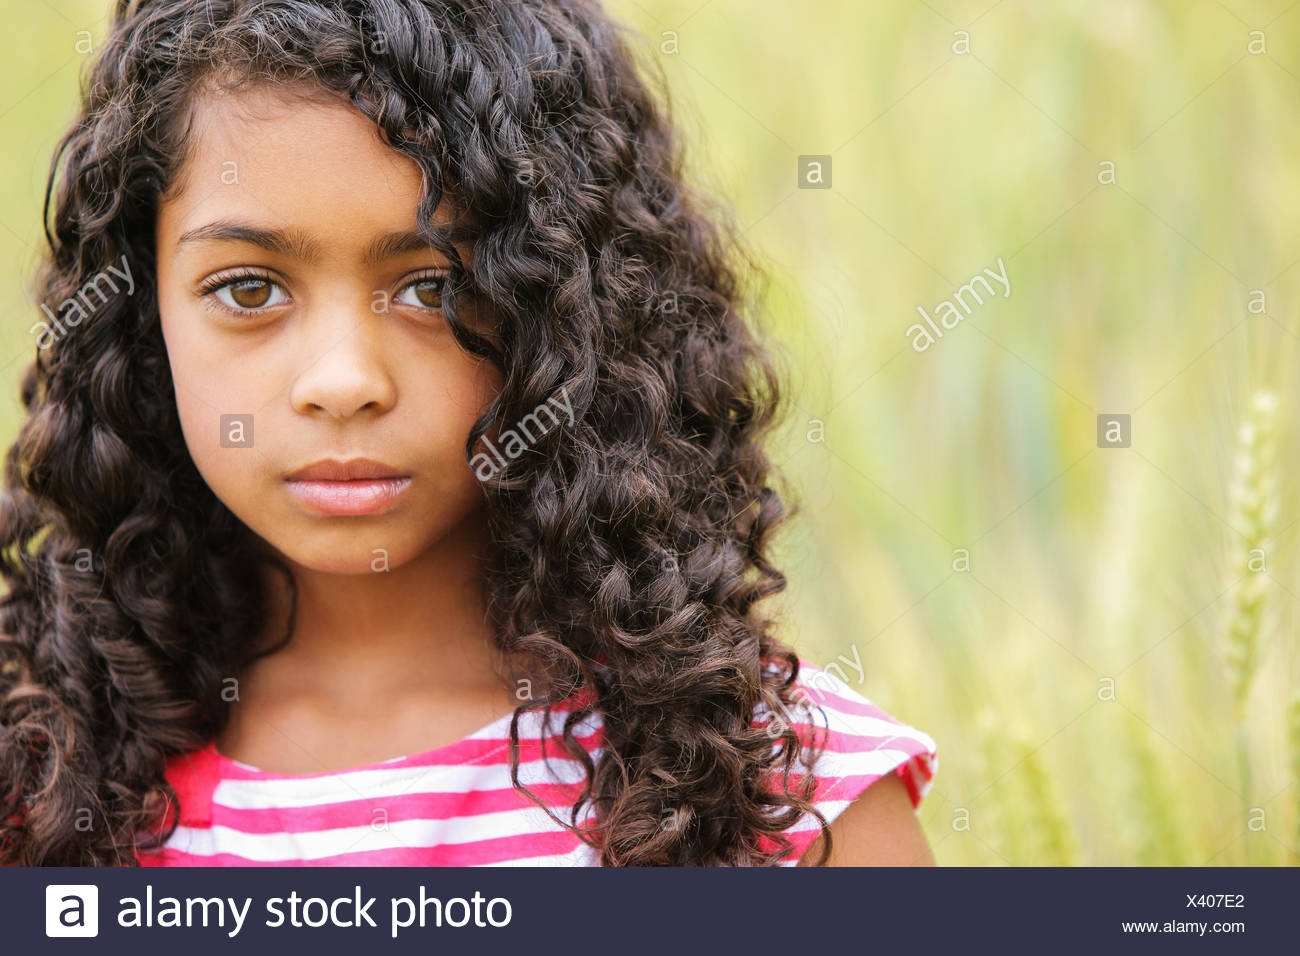 Portrait Of A Young Girl With Dark Curly Hair And Big Brown